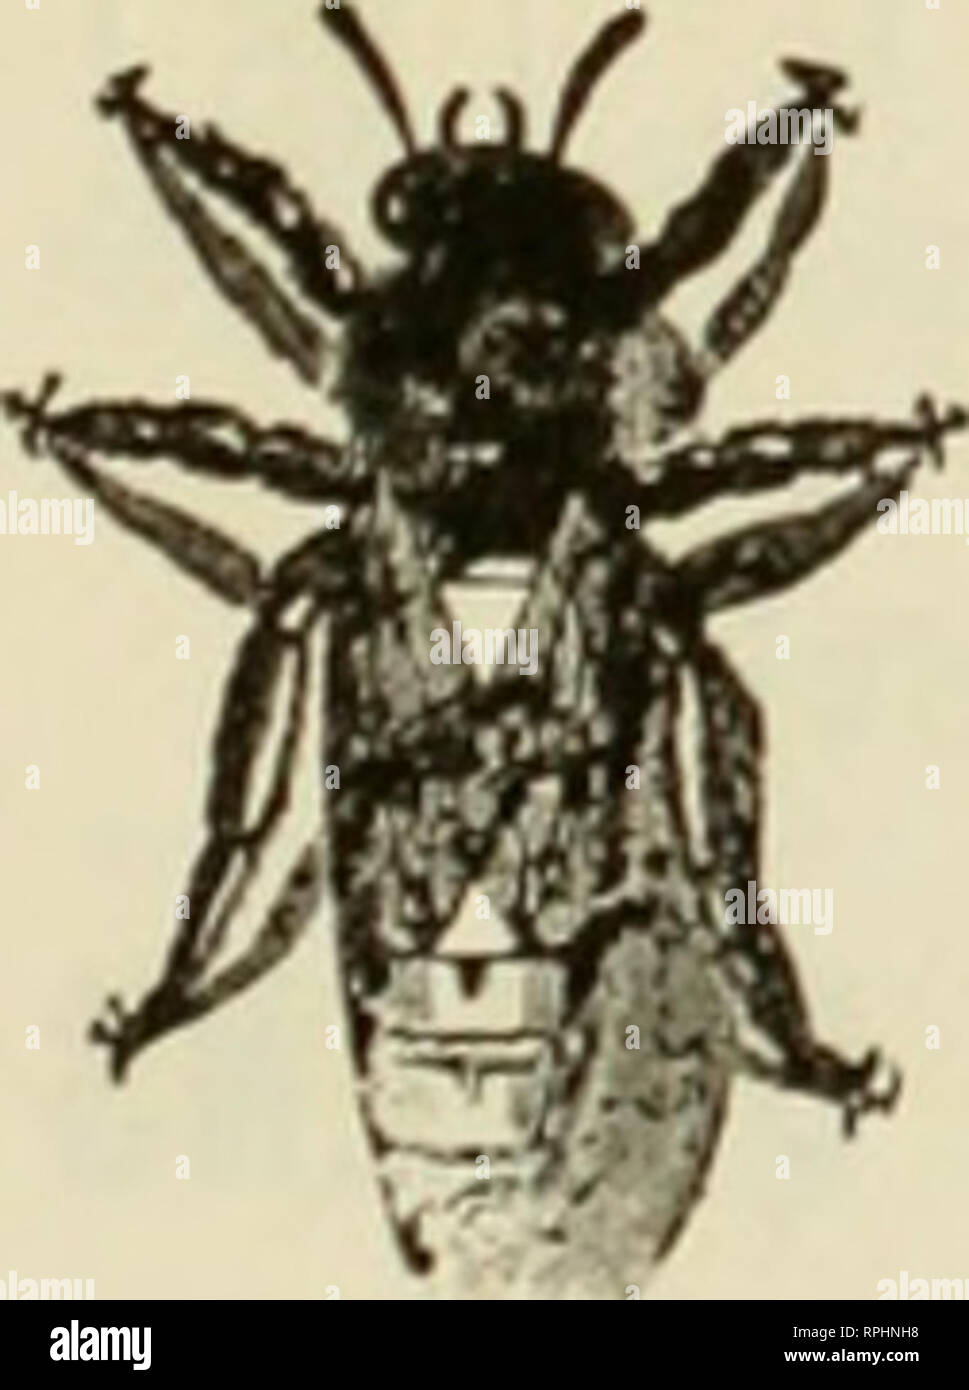 . American bee journal. Bee culture; Bees. Pate«t«d, May20. 1879. BEST ON EARTH. THE FAMOUS Texas Queens! Will be ready about March ist. My Famous Banals Hre une.xcelled for Gen- tleness. Honey-Gather- ing. Prolificness. and as ICarly Breeders. I aiso have the well known 3-Banded Italians carefully selected and bred for Business. All Queens guaranteed Pure and P'ree from Disease. Prices: Untested—each. 75 cts.; per dozen, IS.oo Tested— each. $1.25; per dozen. 12.00. If you wish to swell your means. Just try my Famous Texas Queens 2.^11 GRANT ANDERSON, San Benito, Texas. The Campbell System INS Stock Photo